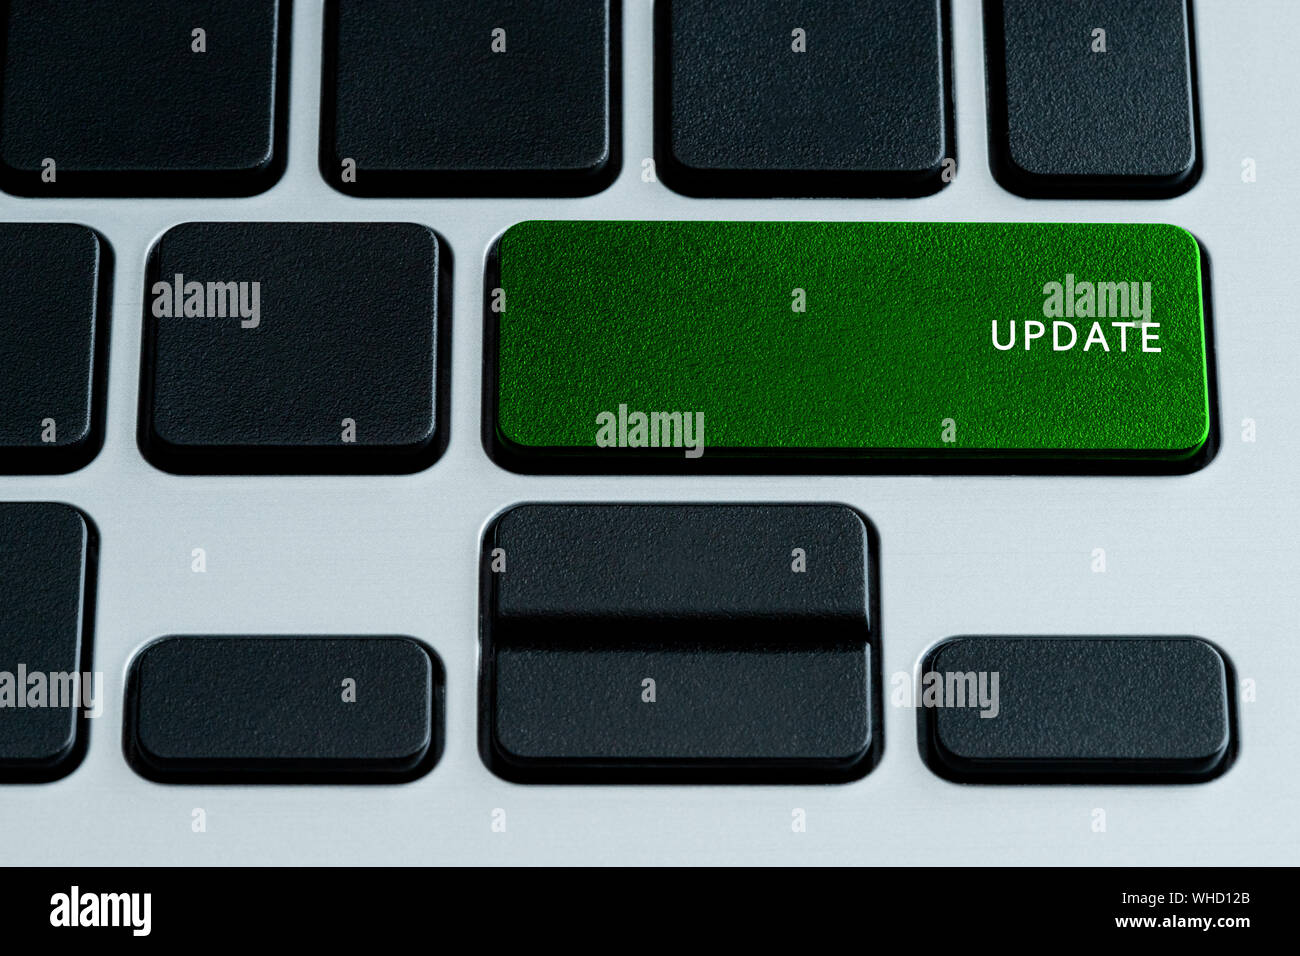 Update on laptop keyboard.  Isolated text on theme of internet security. Stock Photo